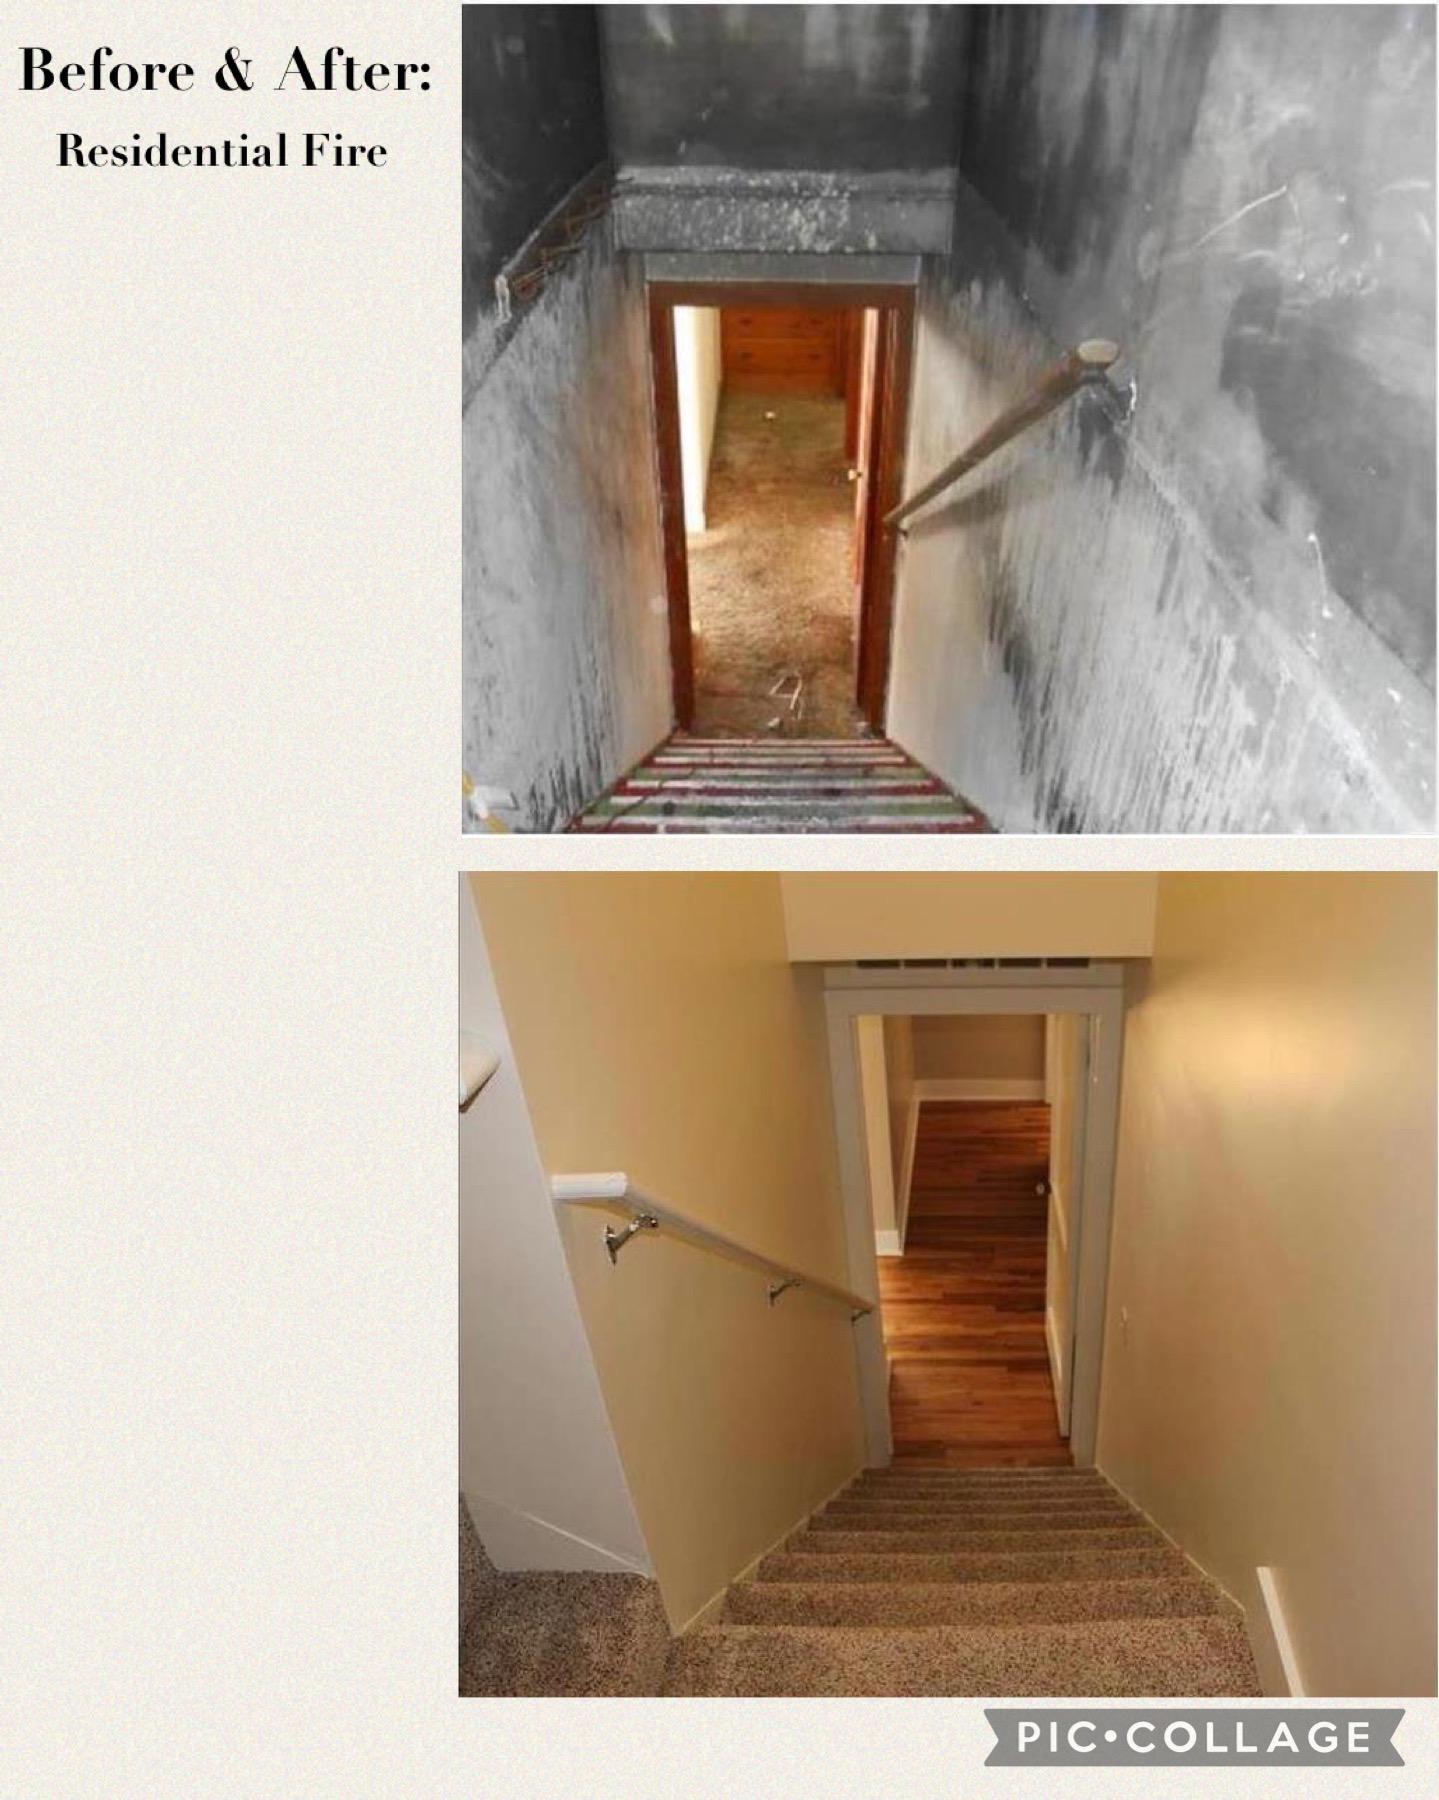 Before & After... SERVPRO of Guelph, Kitchener, Waterloo, and Cambridge Guelph (519)837-8787